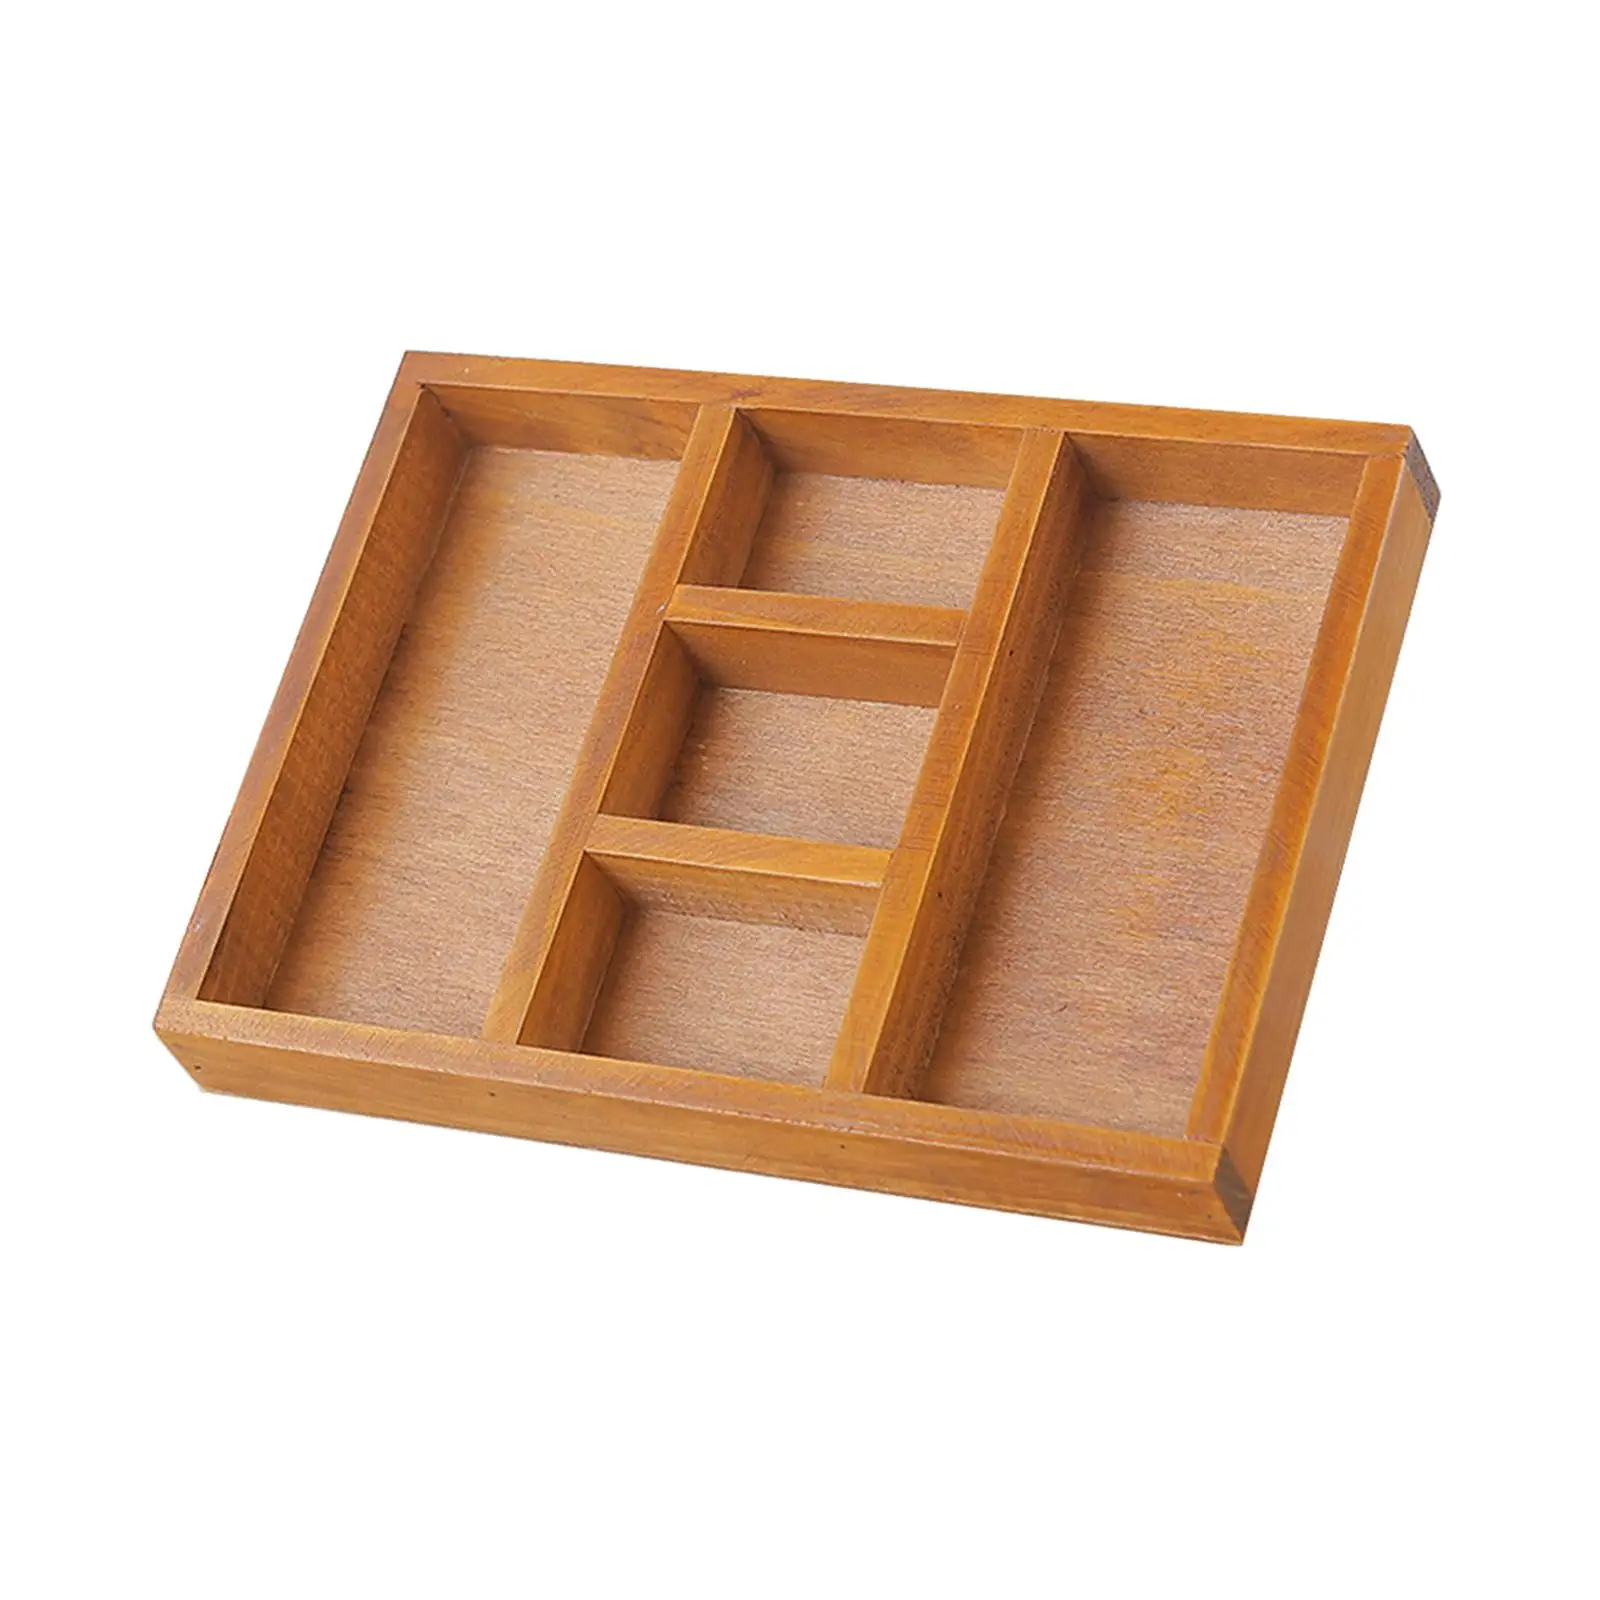 Wooden Jewelry Display Tray Case Holder Divider Box for Accessories Sundries Necklace Cosmetic Home Organization